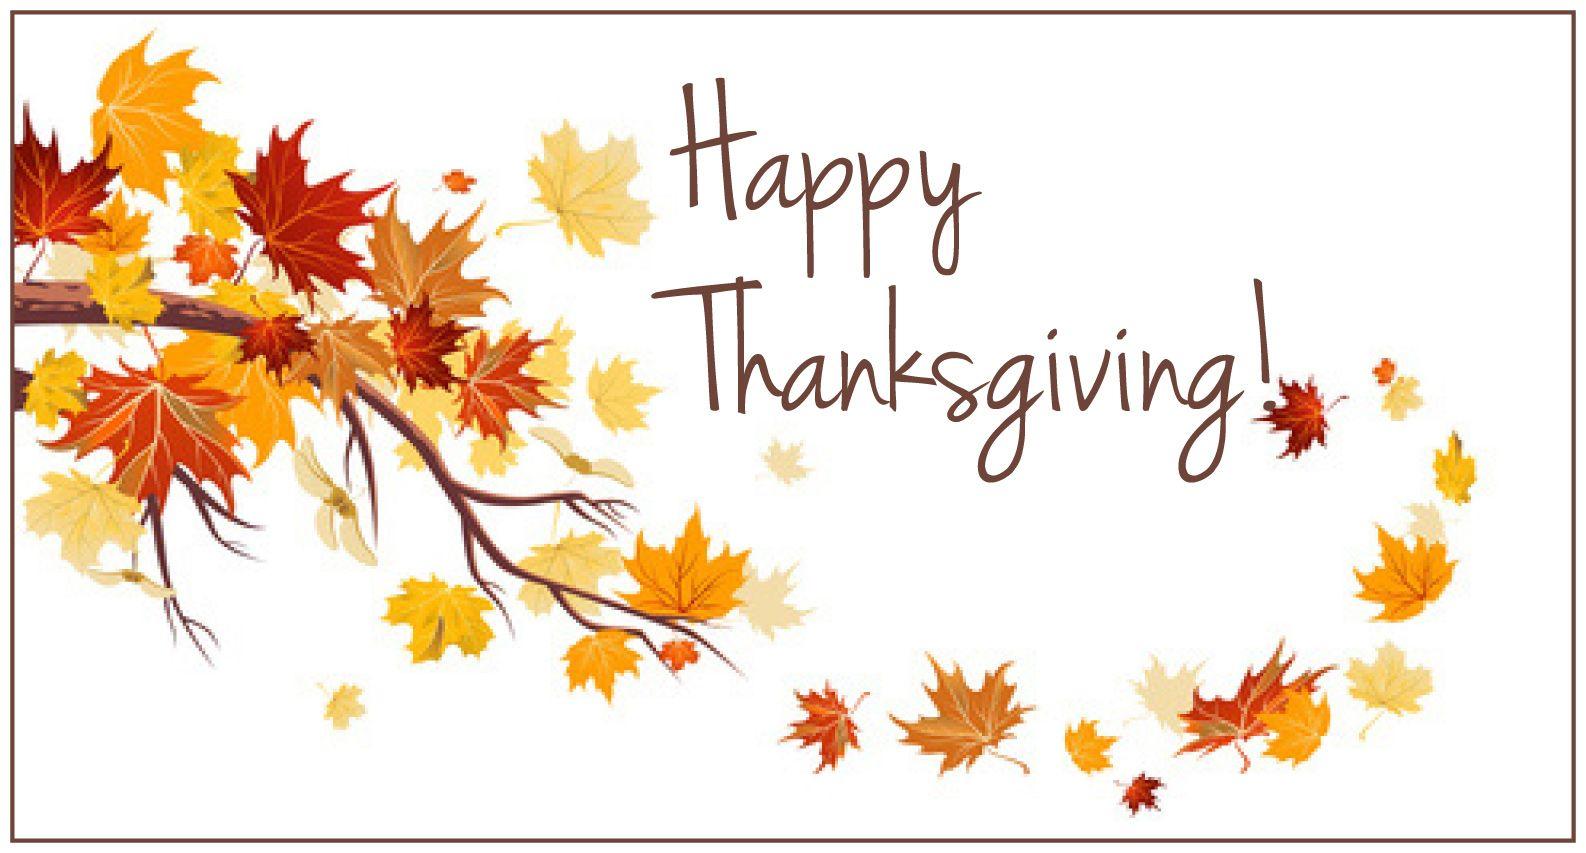 Wish You Happy Thanksgiving 2017 Image, Quotes, Messages